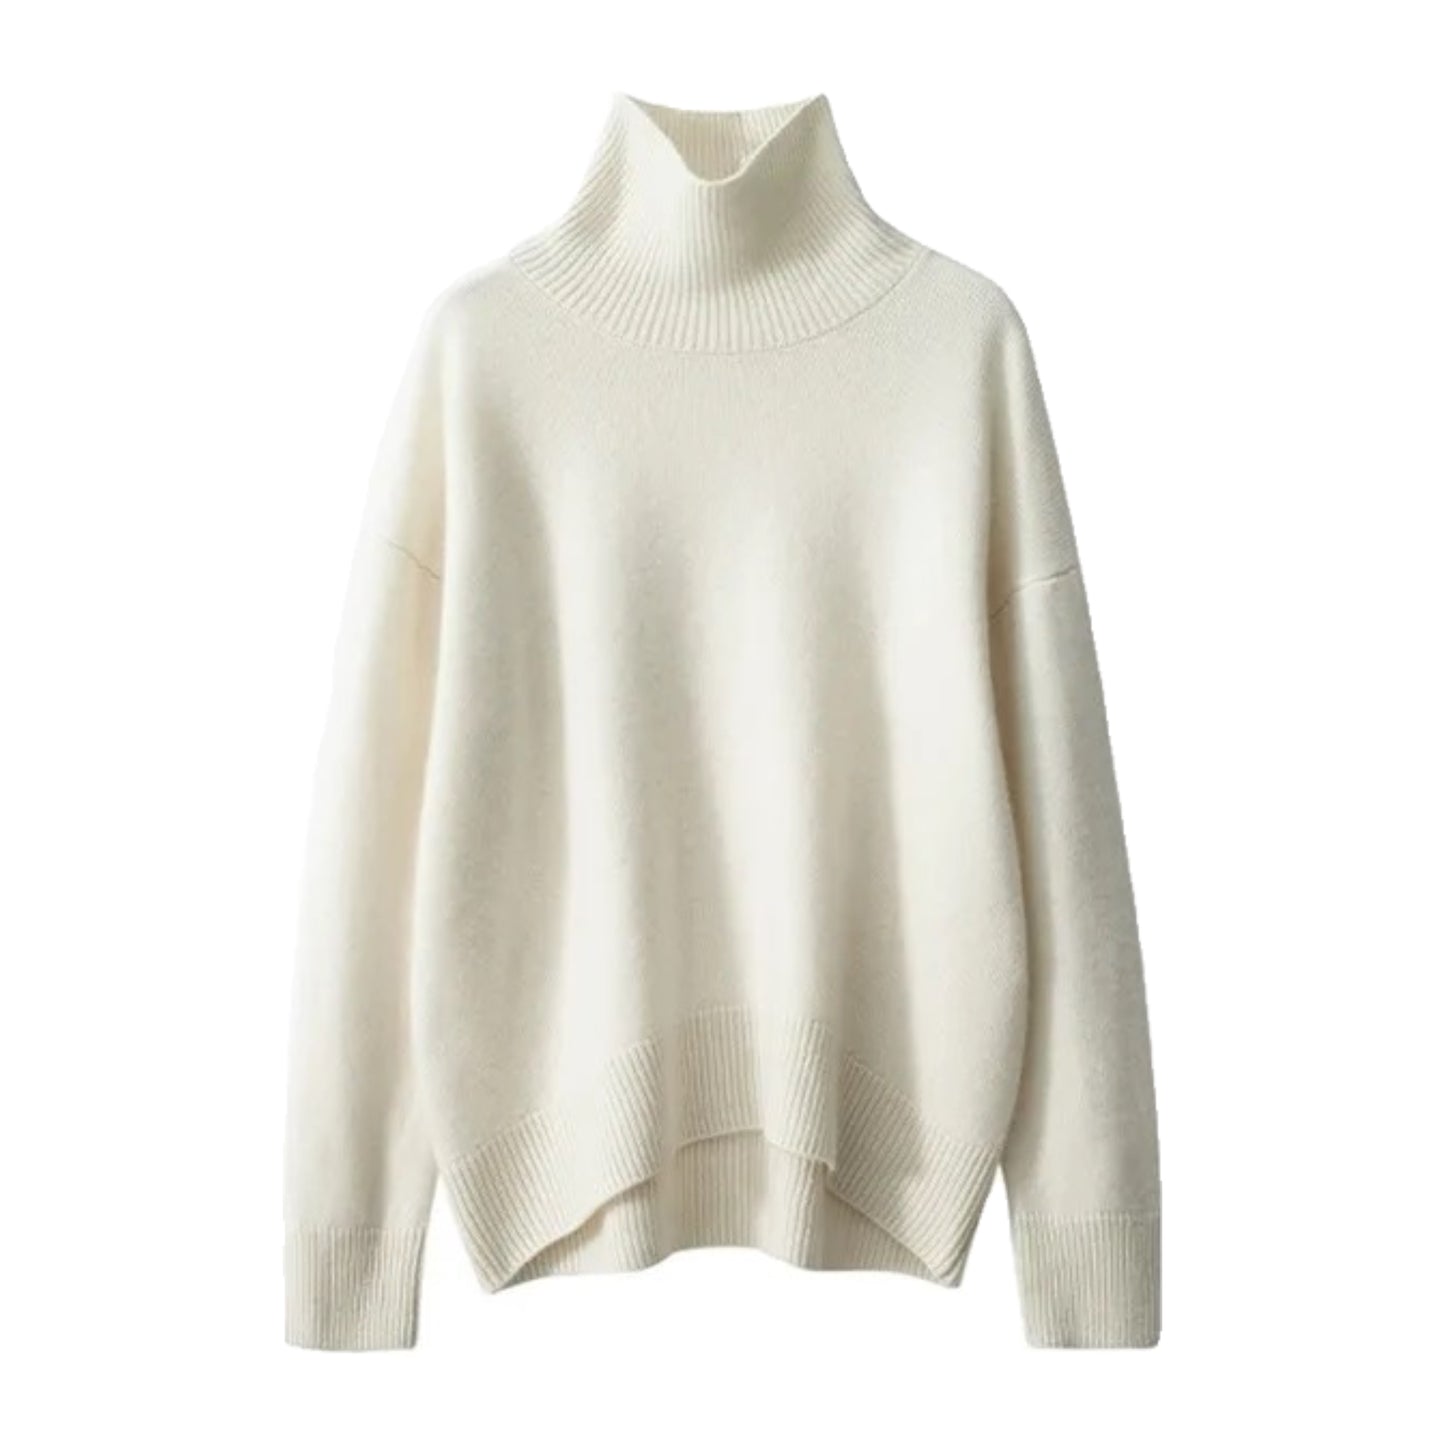 White Knit Turtleneck Oversized Pull Over Sweater